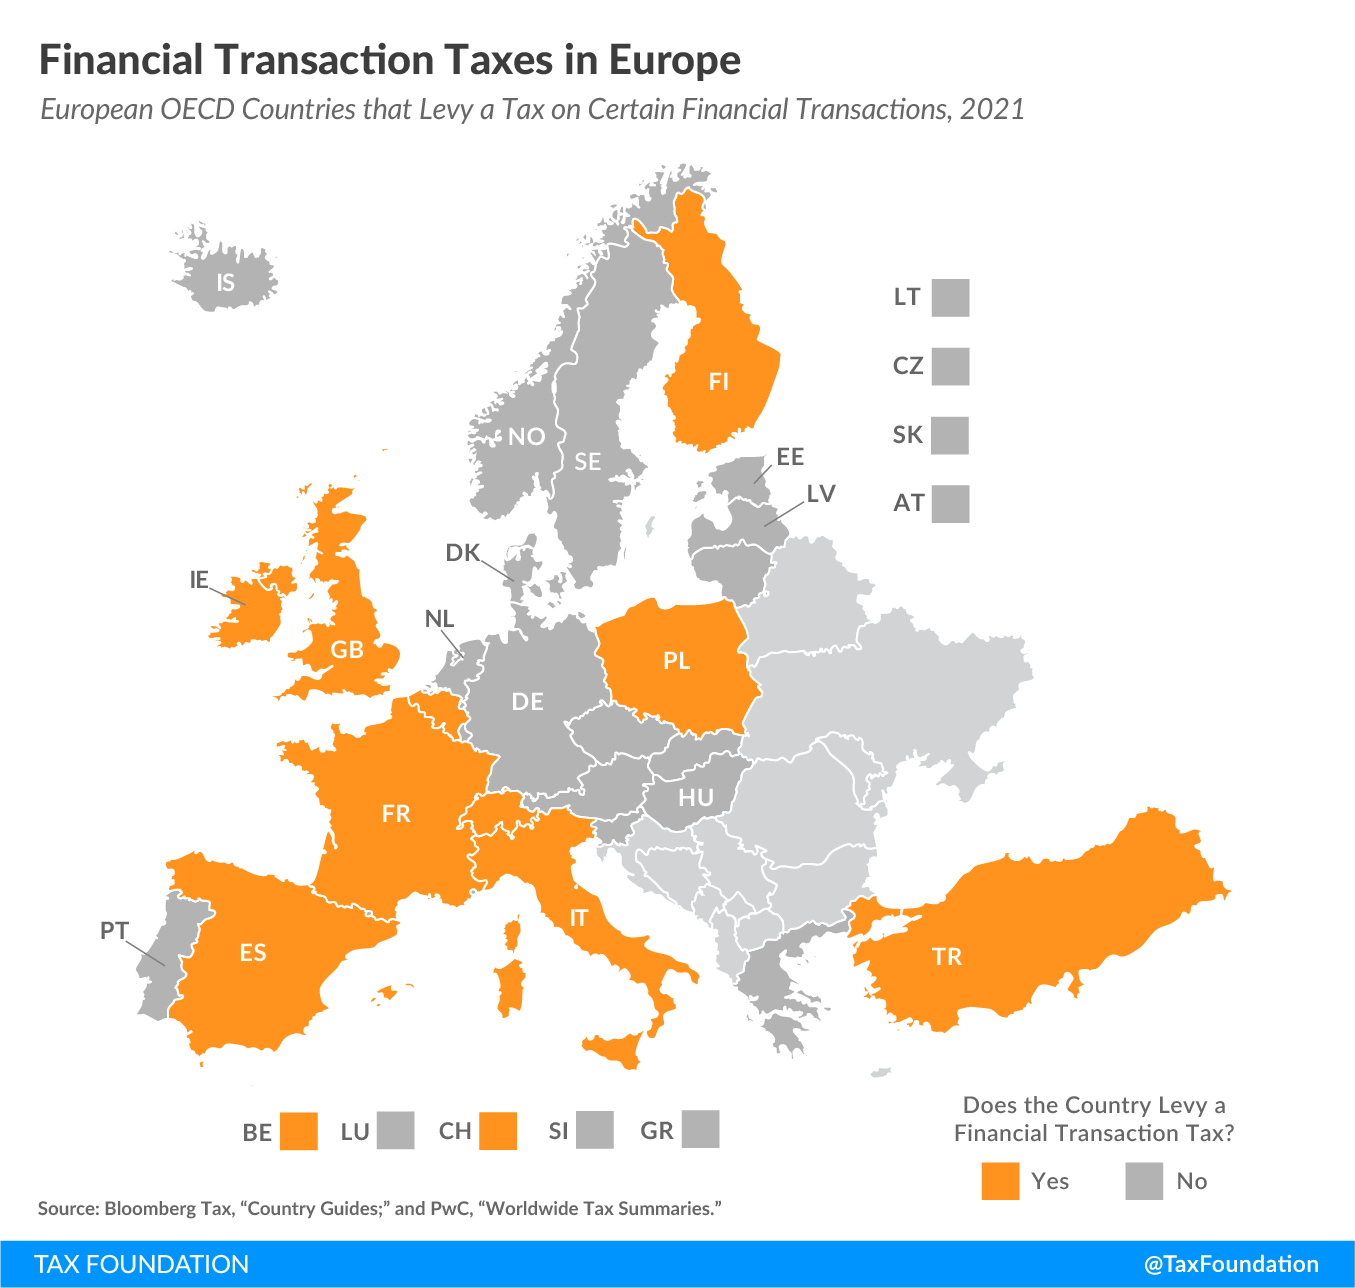 2021 financial transaction taxes in Europe, 2021 financial transaction tax Europe. European OECD countries impose a type of FTT.